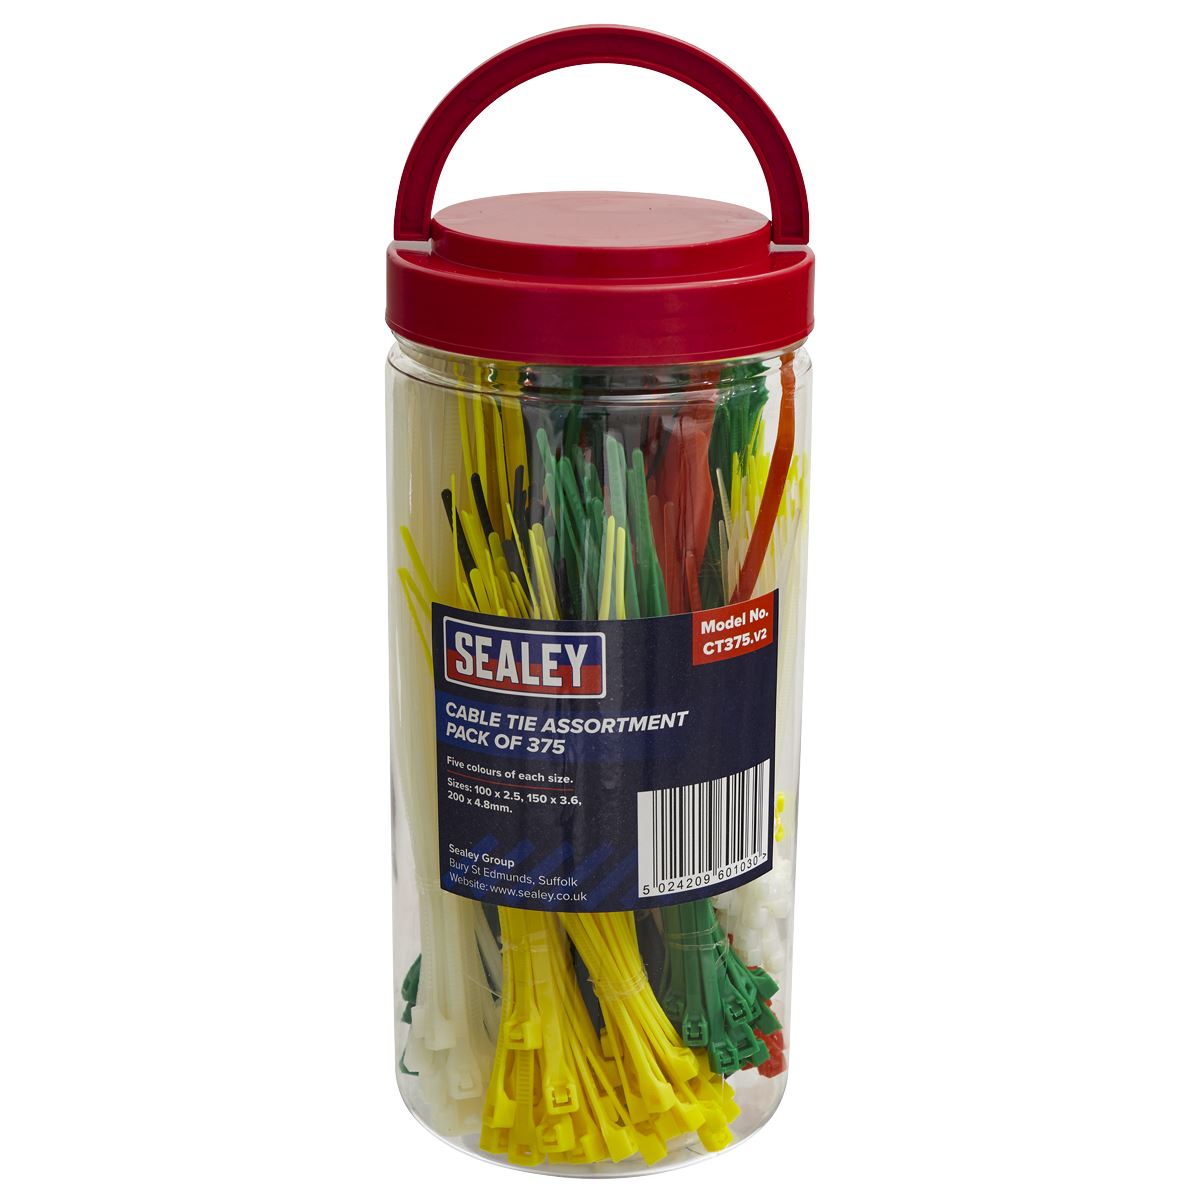 Sealey Cable Tie Assortment Pack of 375 CT375